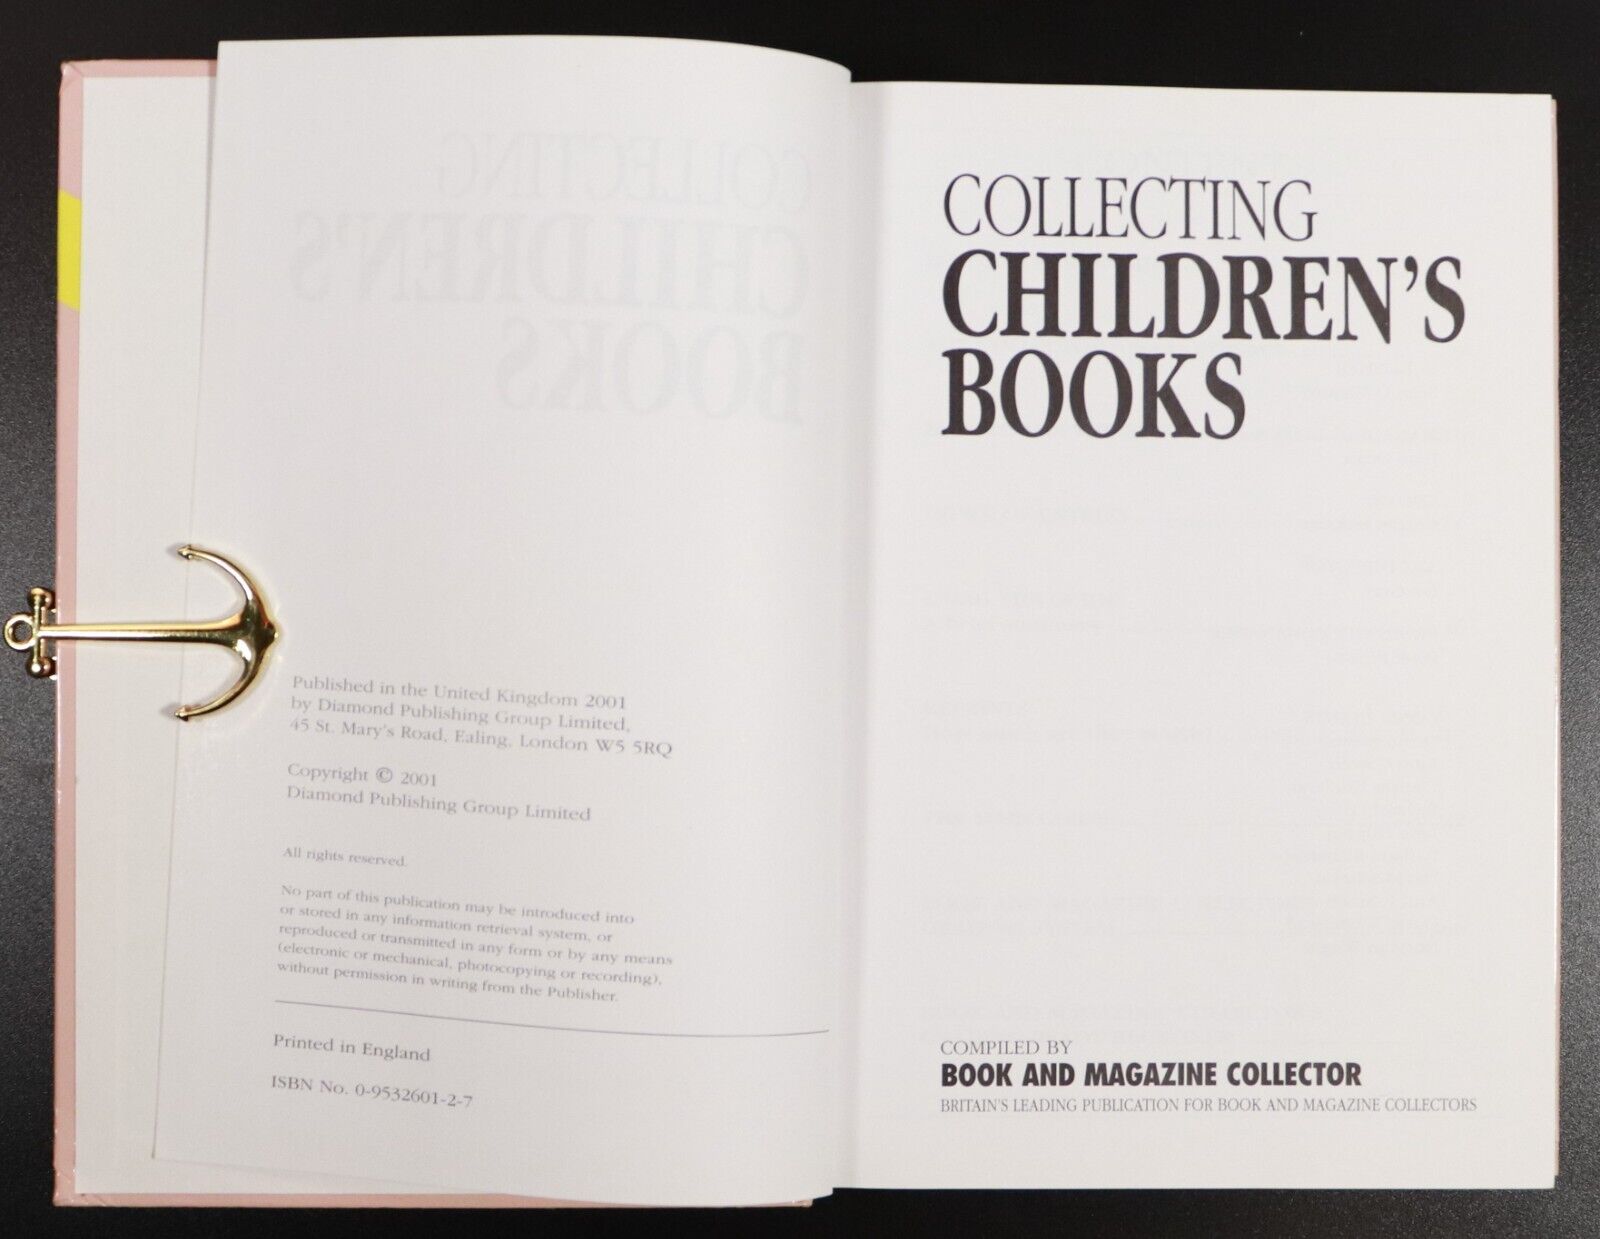 2001 Collecting Children's Books - Childrens Book Collector Reference Guide